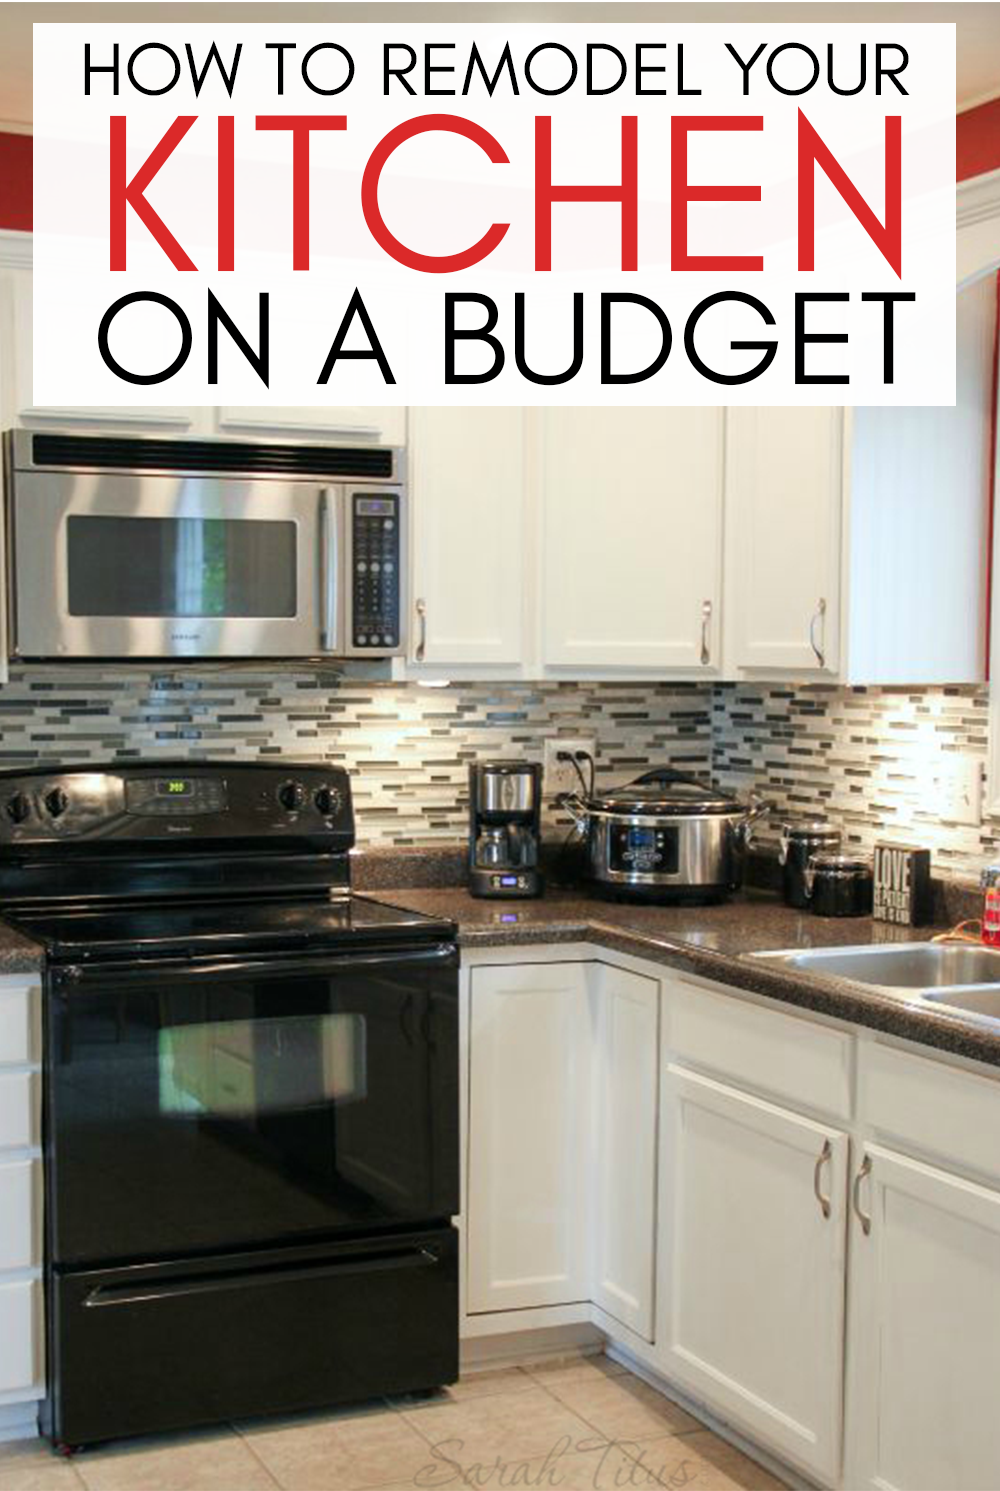 How To Remodel Your Kitchen On A Budget - Sarah Titus